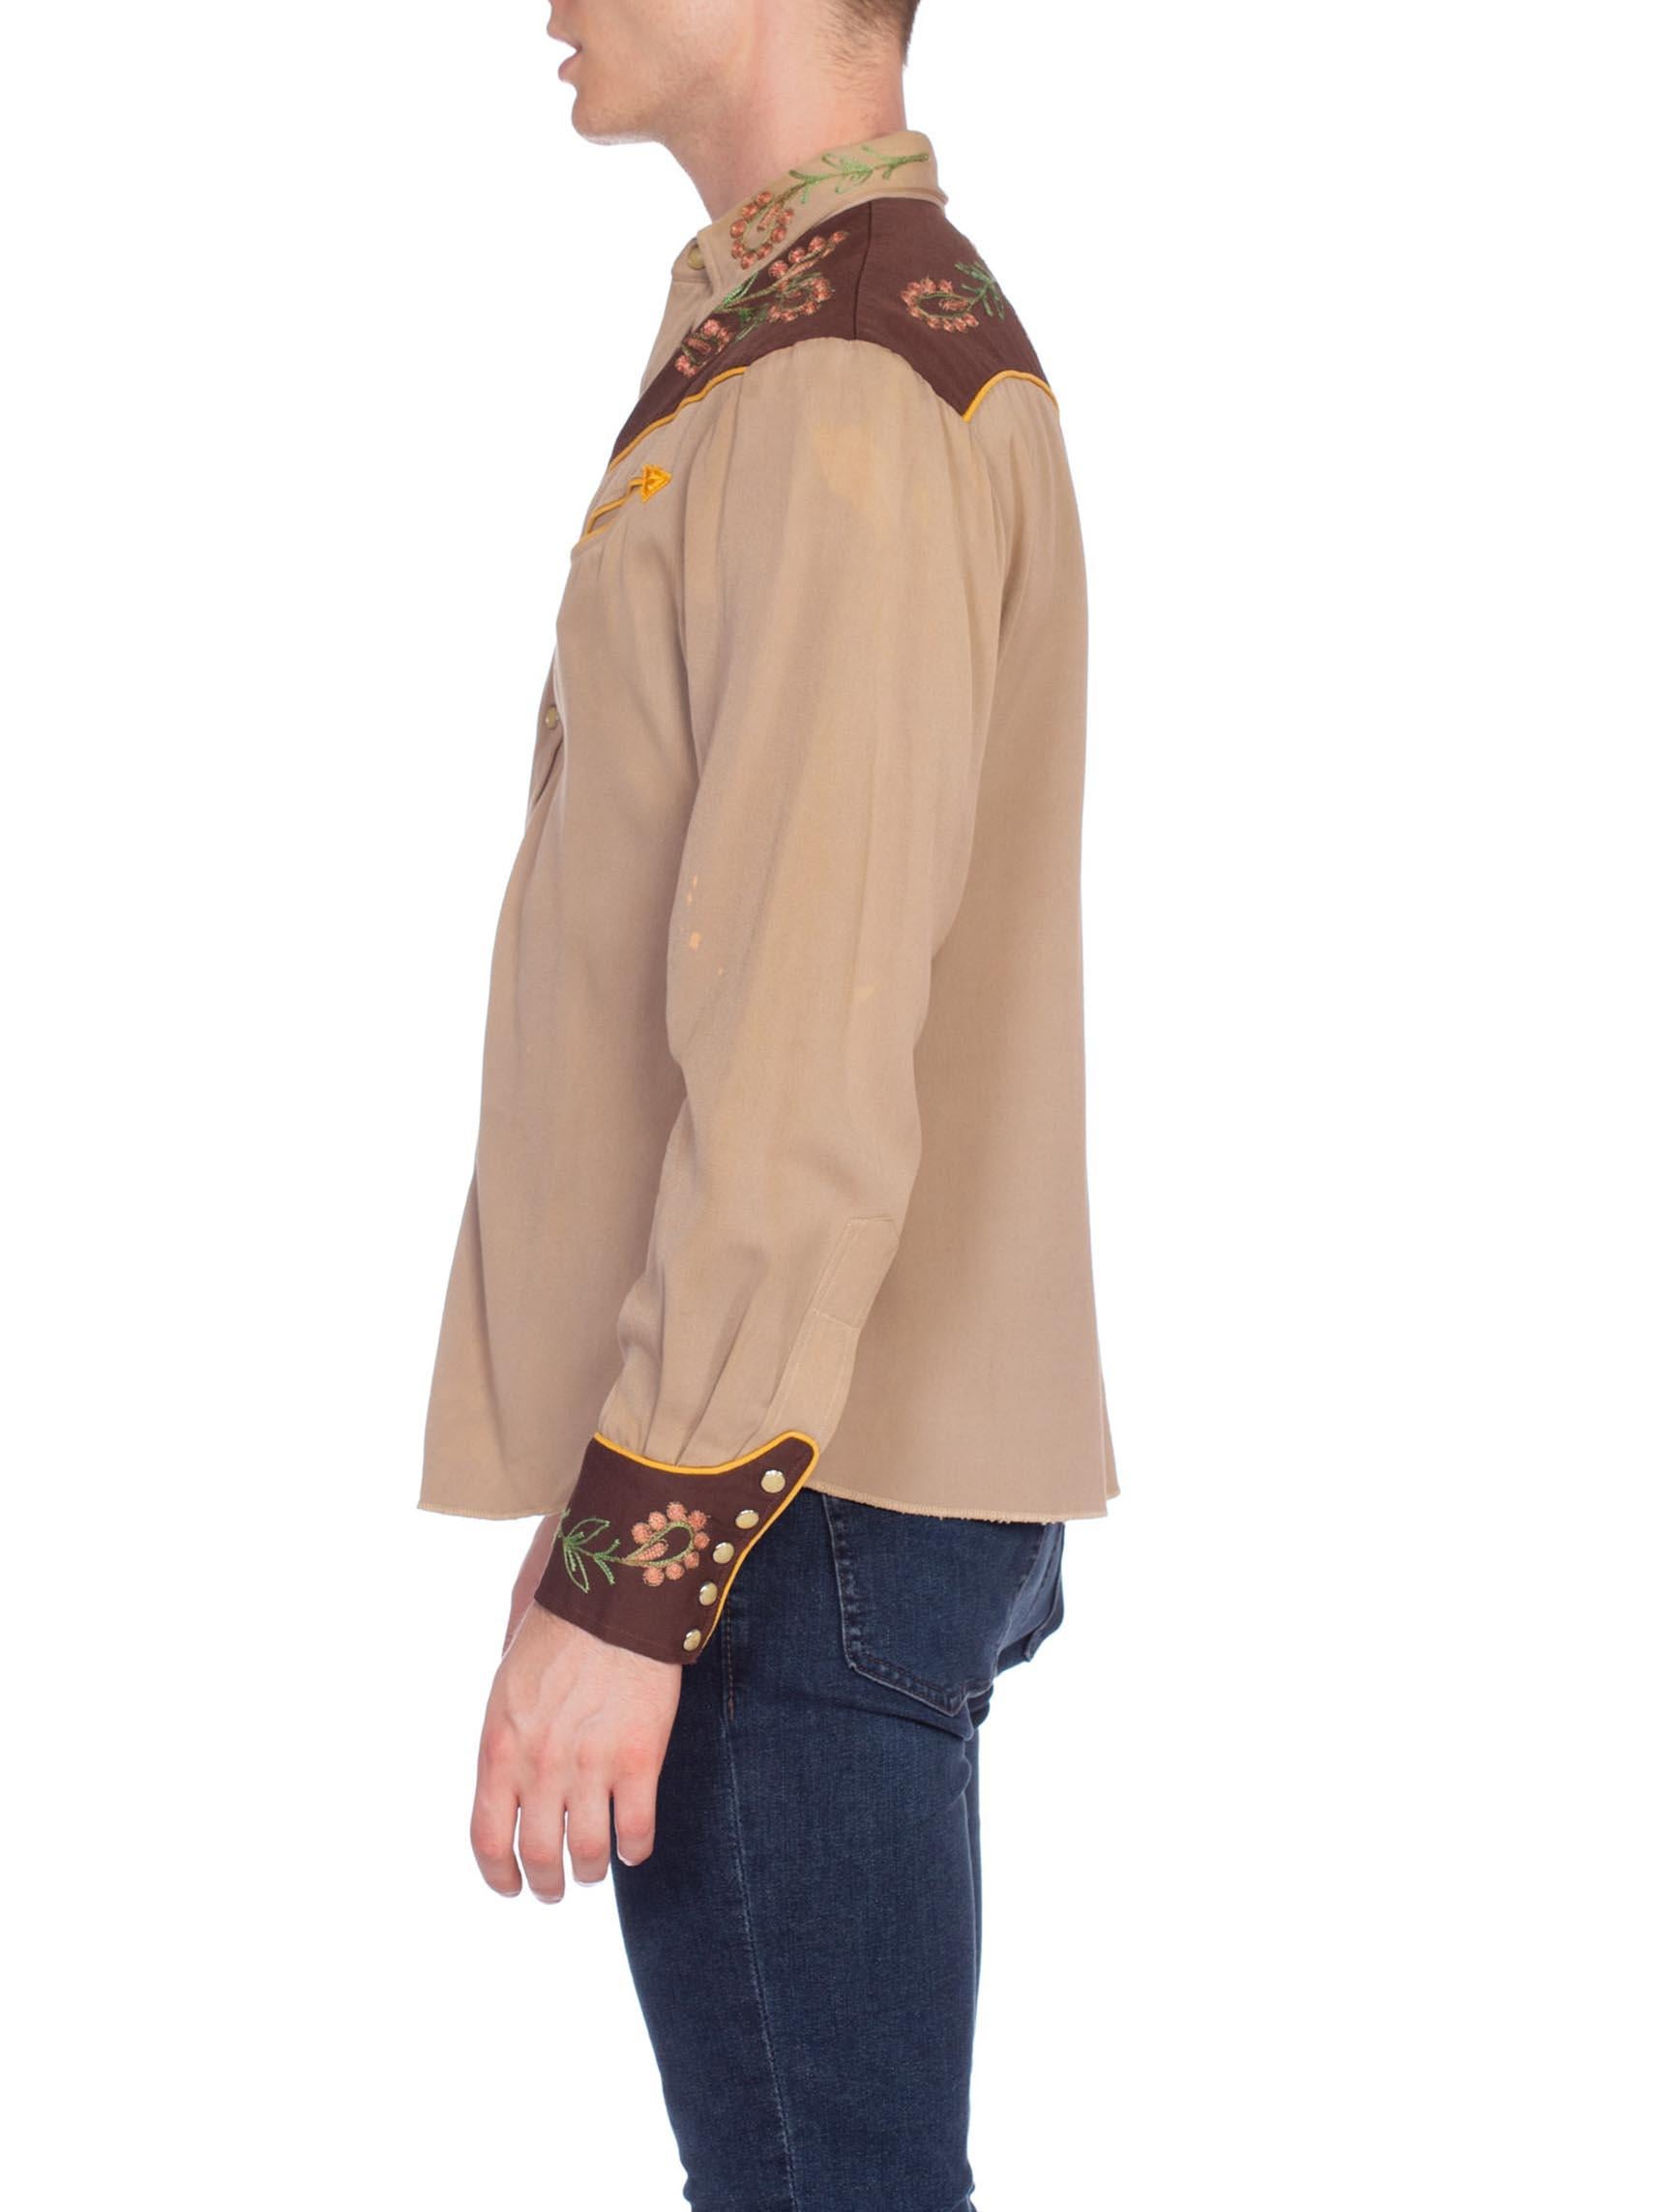 minor spots and holes throughout 1940'S Brown Wool Men's Two-Tone Western Shirt With Metallic Floral Embroidery